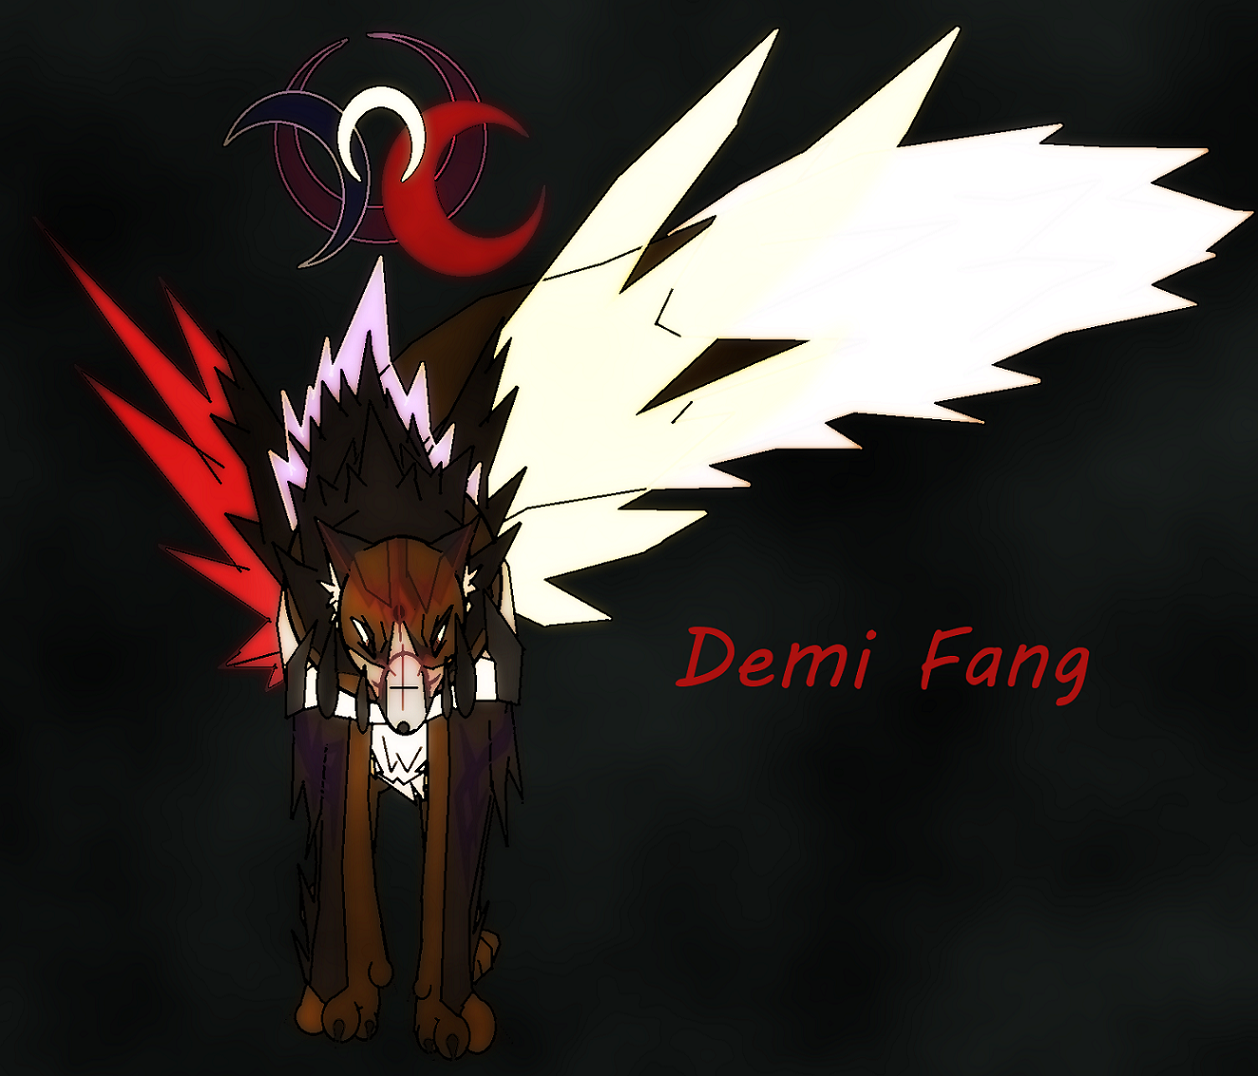 Demi Fang by DyneTheCaracal